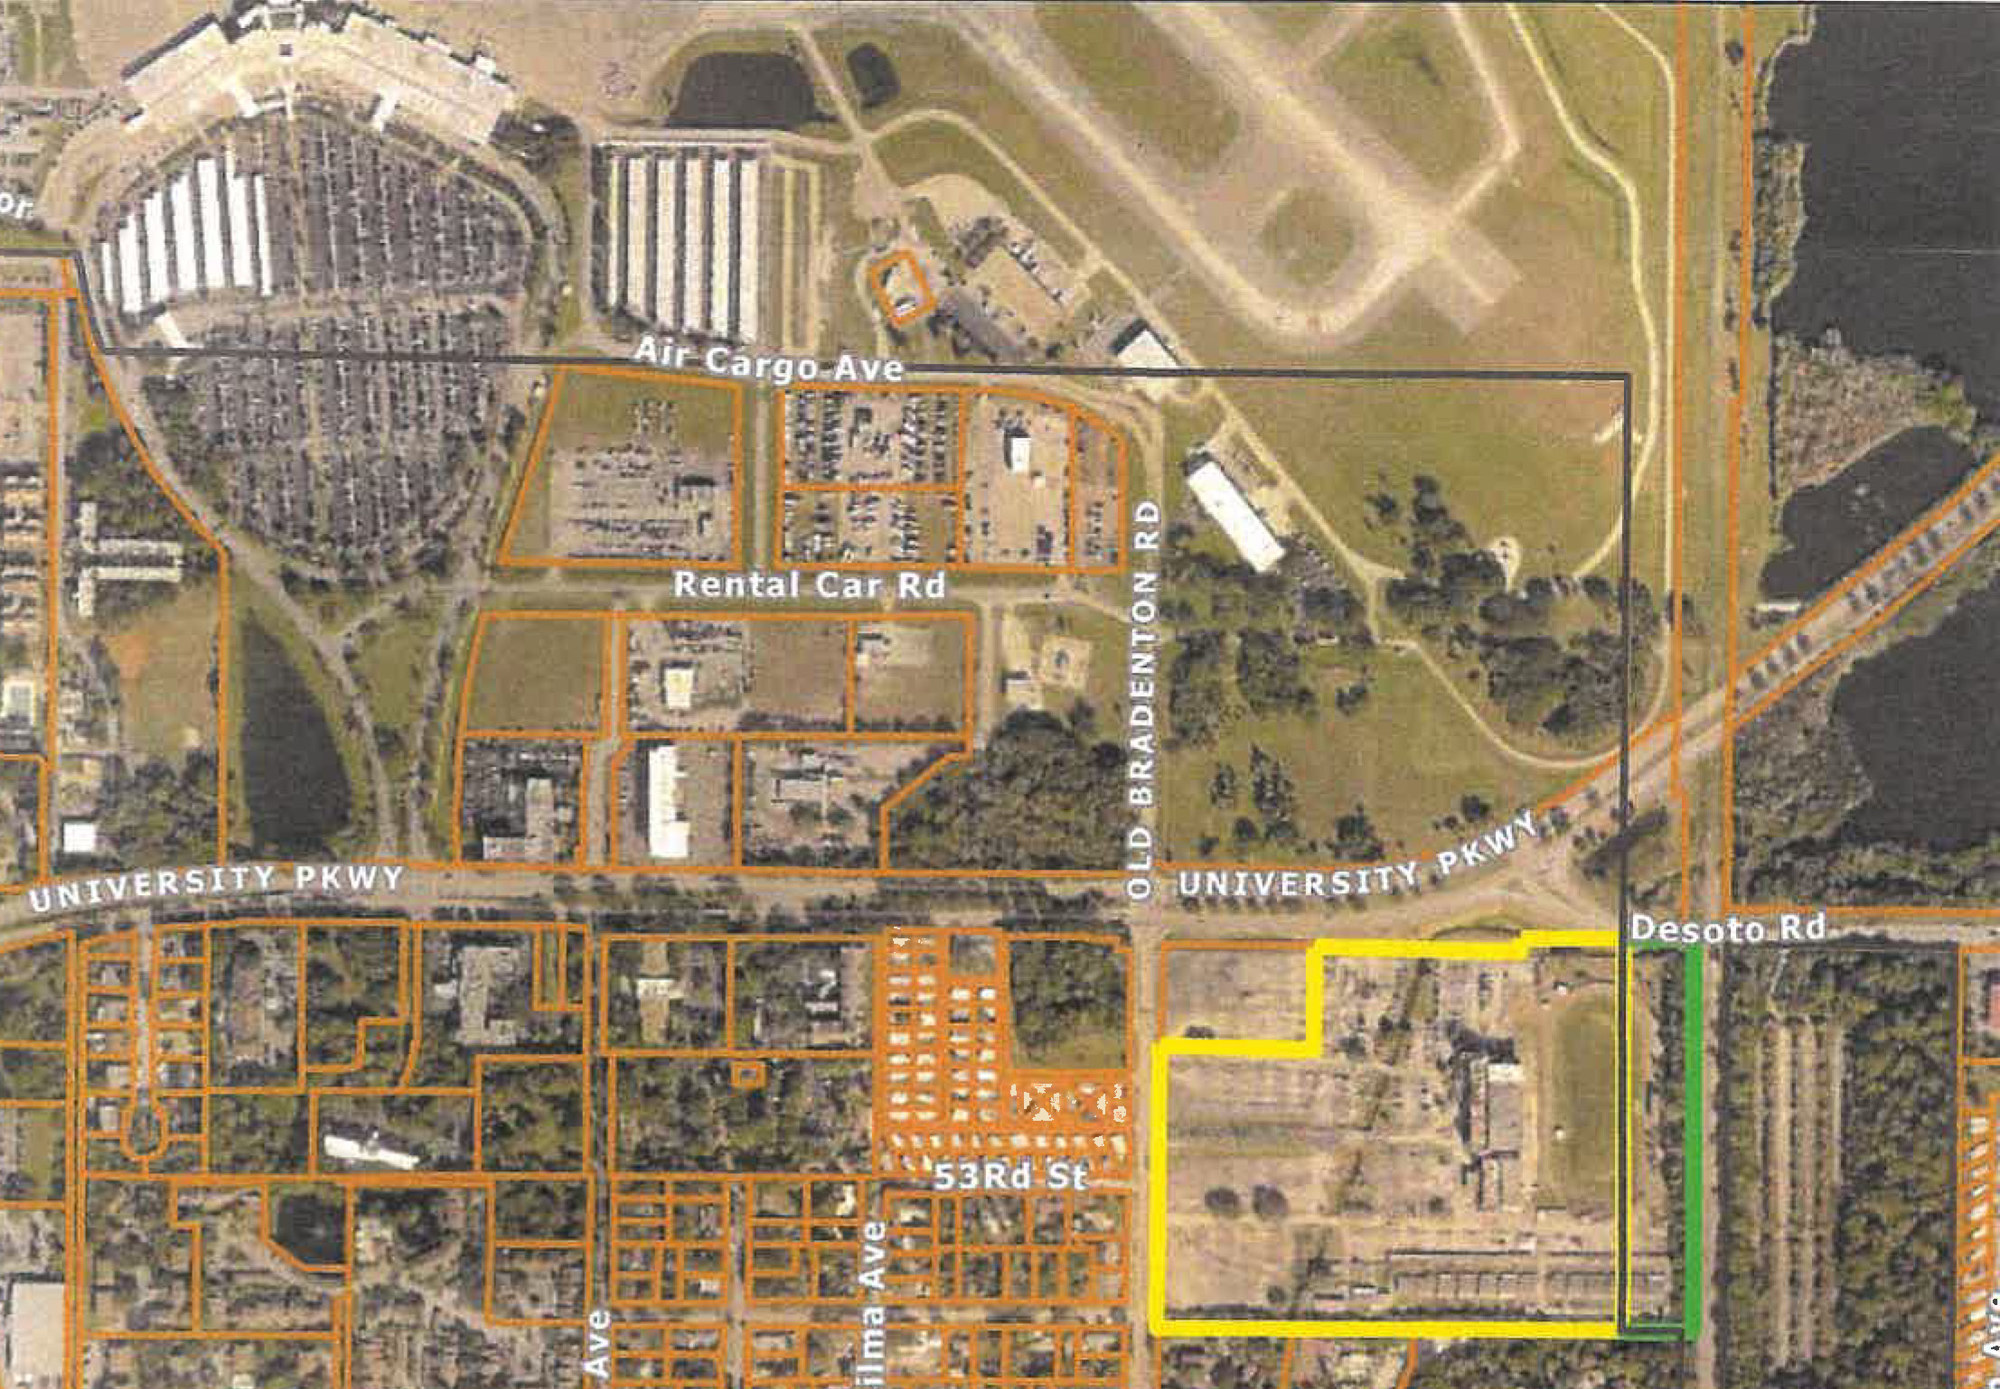 Lined in yellow is the former Kennel Club site planned to become apartments. Lined in green is county land being annexed into the city of Sarasota. (Courtesy map)